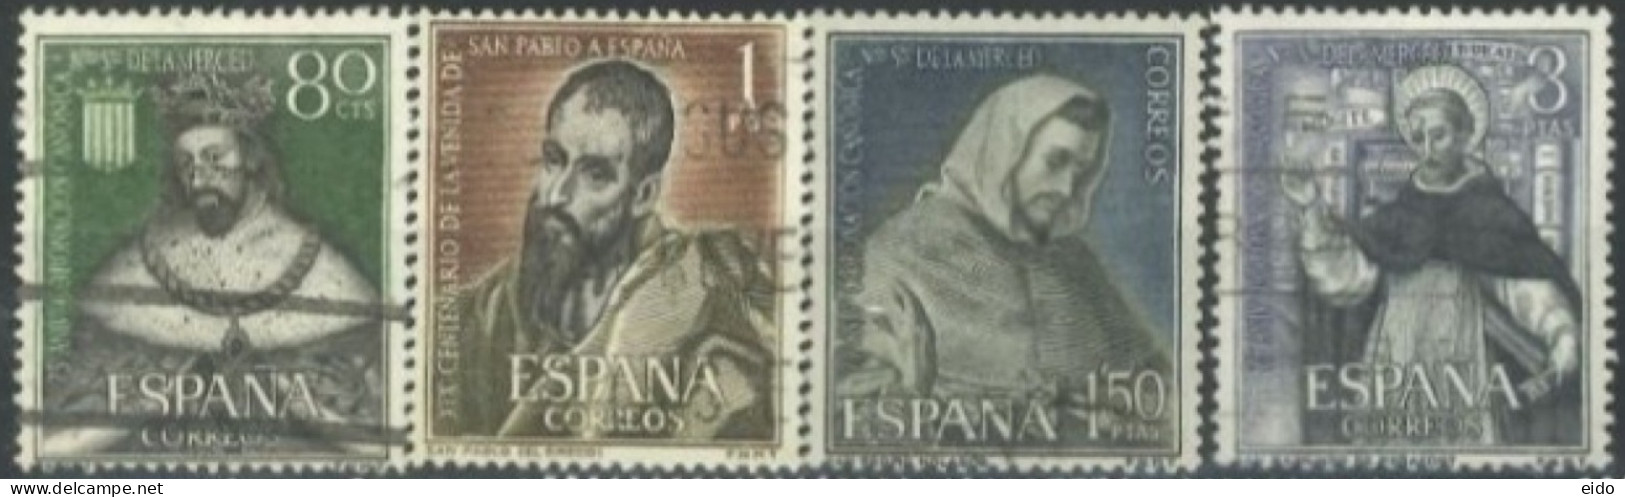 SPAIN, 1963, STAMPS SET OF 4, USED. - Usati